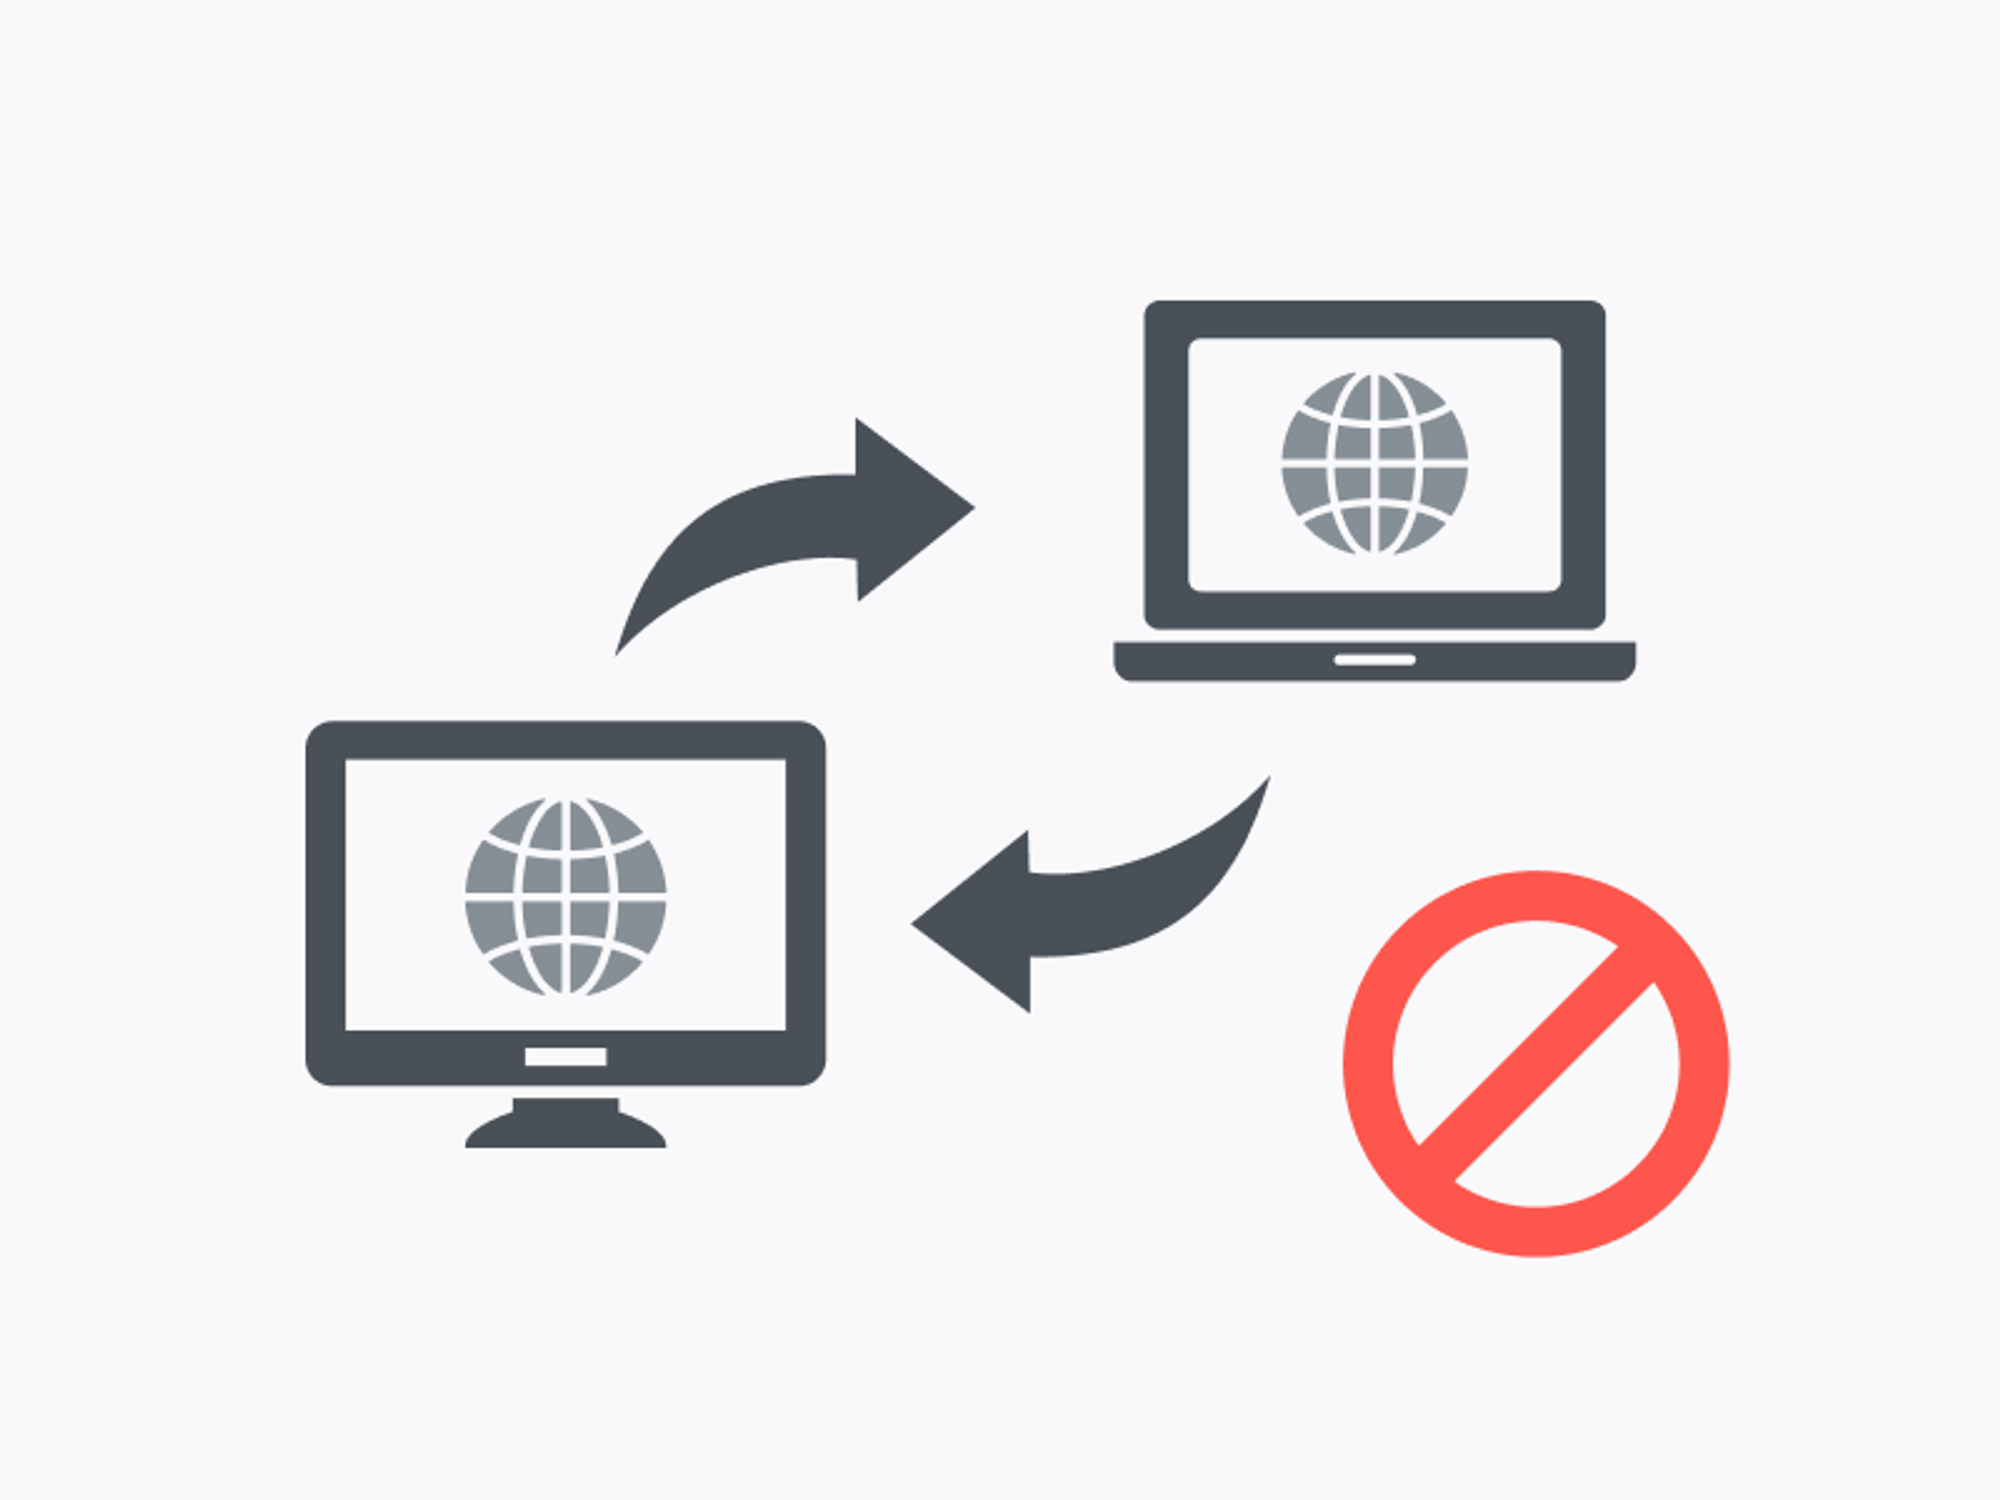 Eliminate remote programs that hackers can easily access to block attack routes in advance.